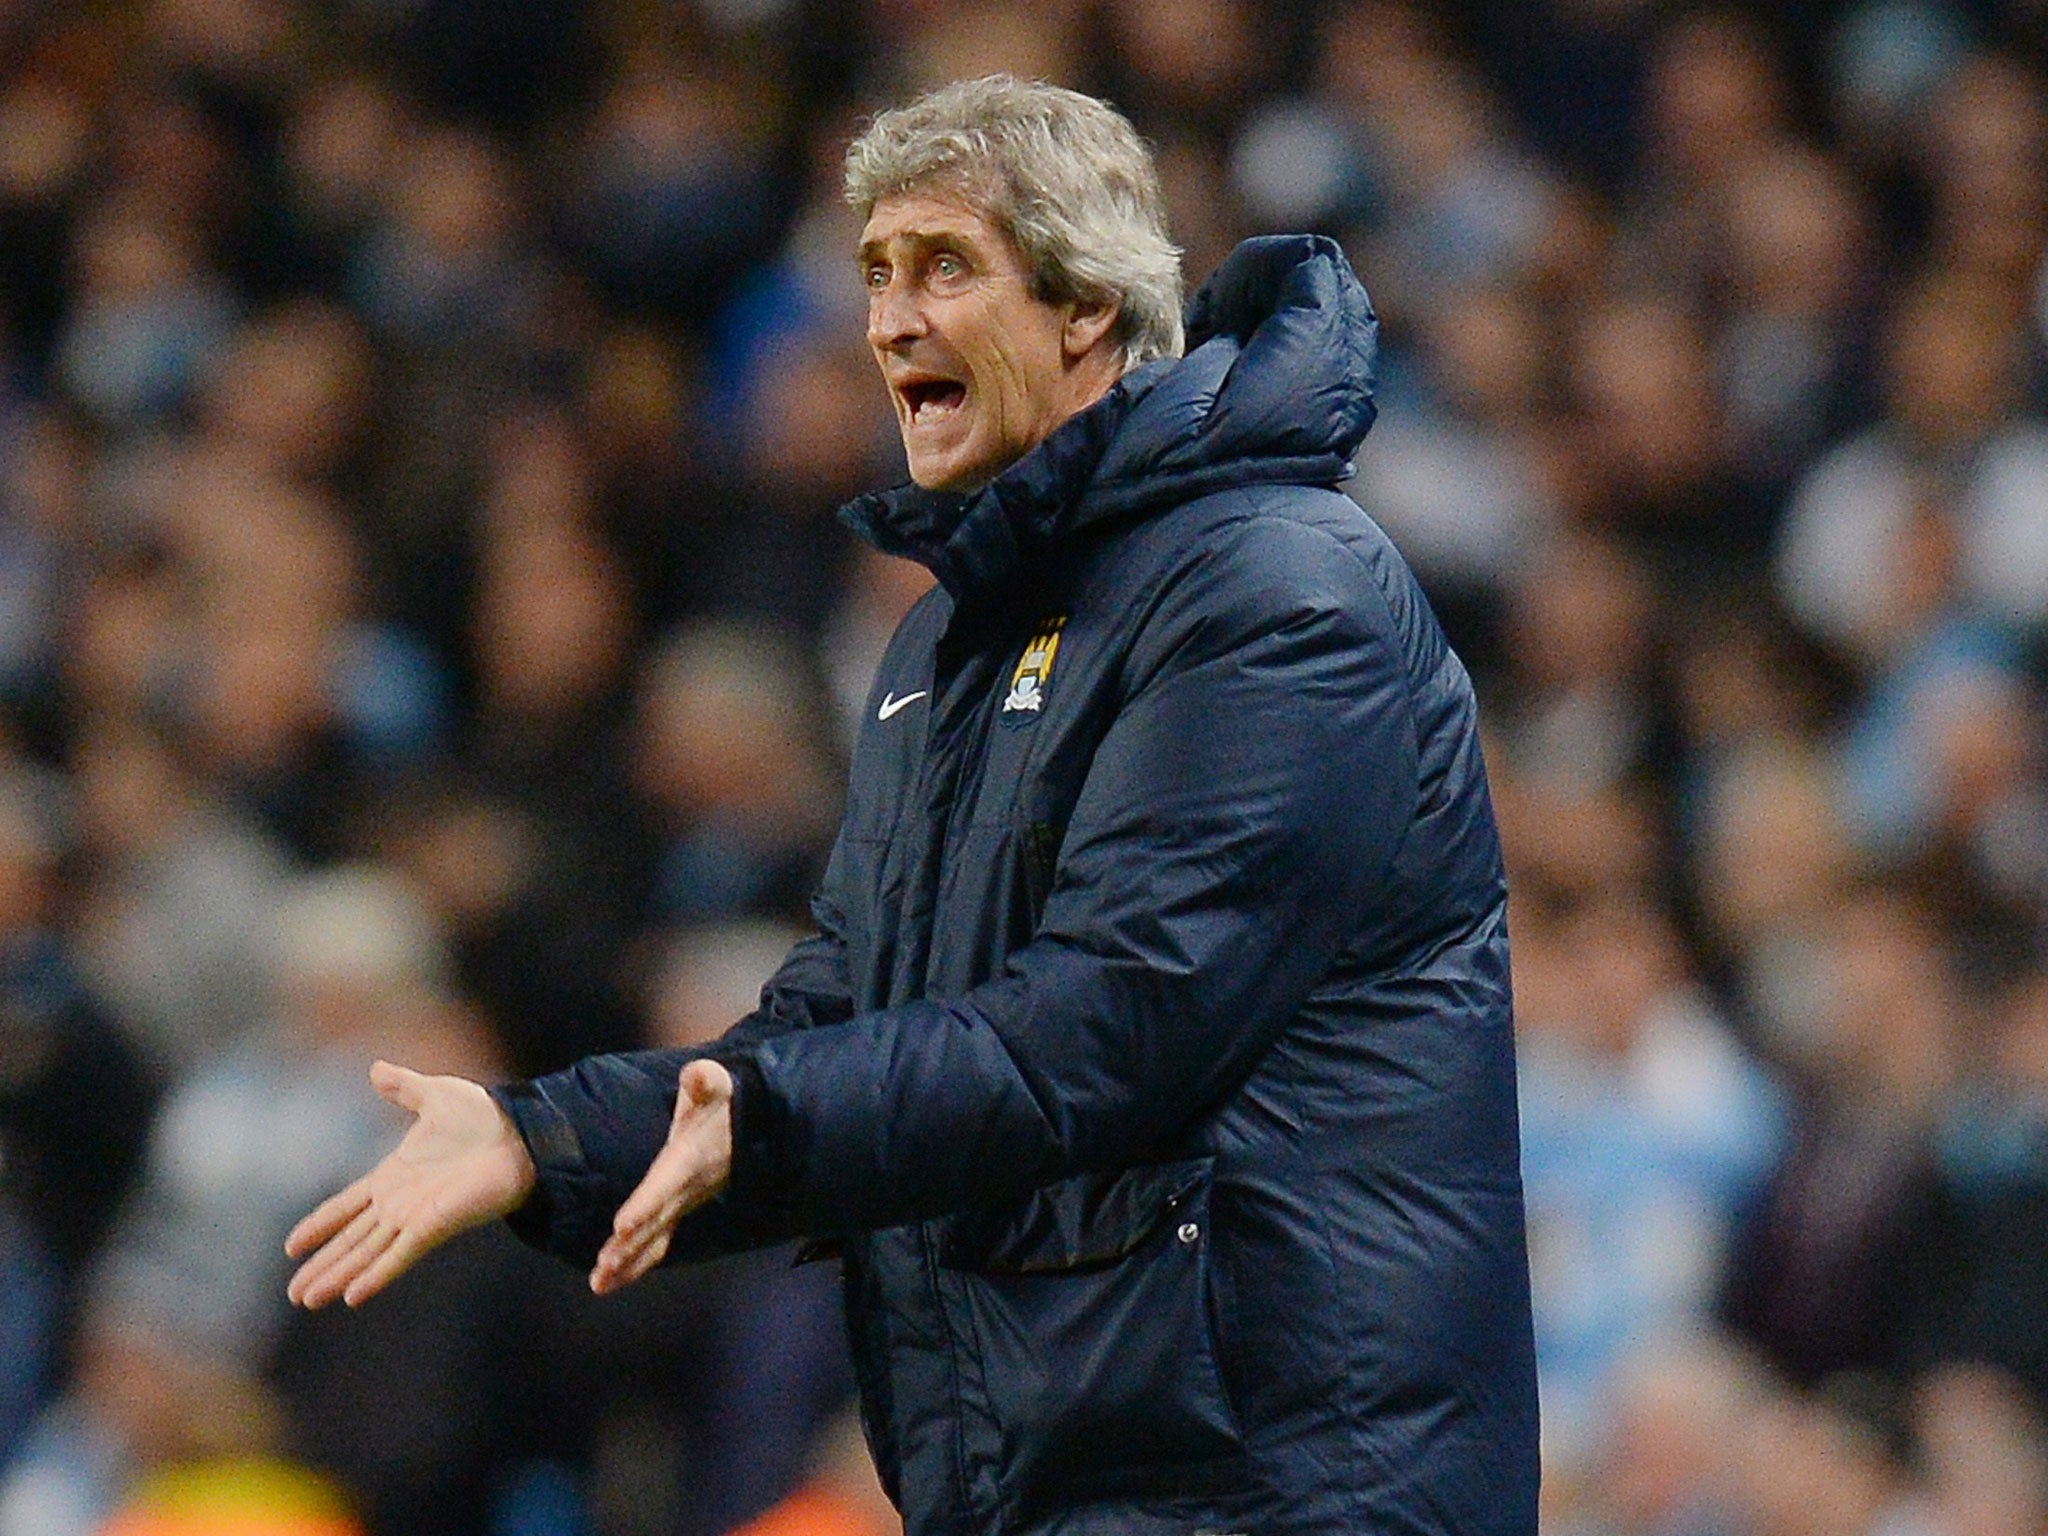 Manuel Pellegrini makes a gesture from the sideline